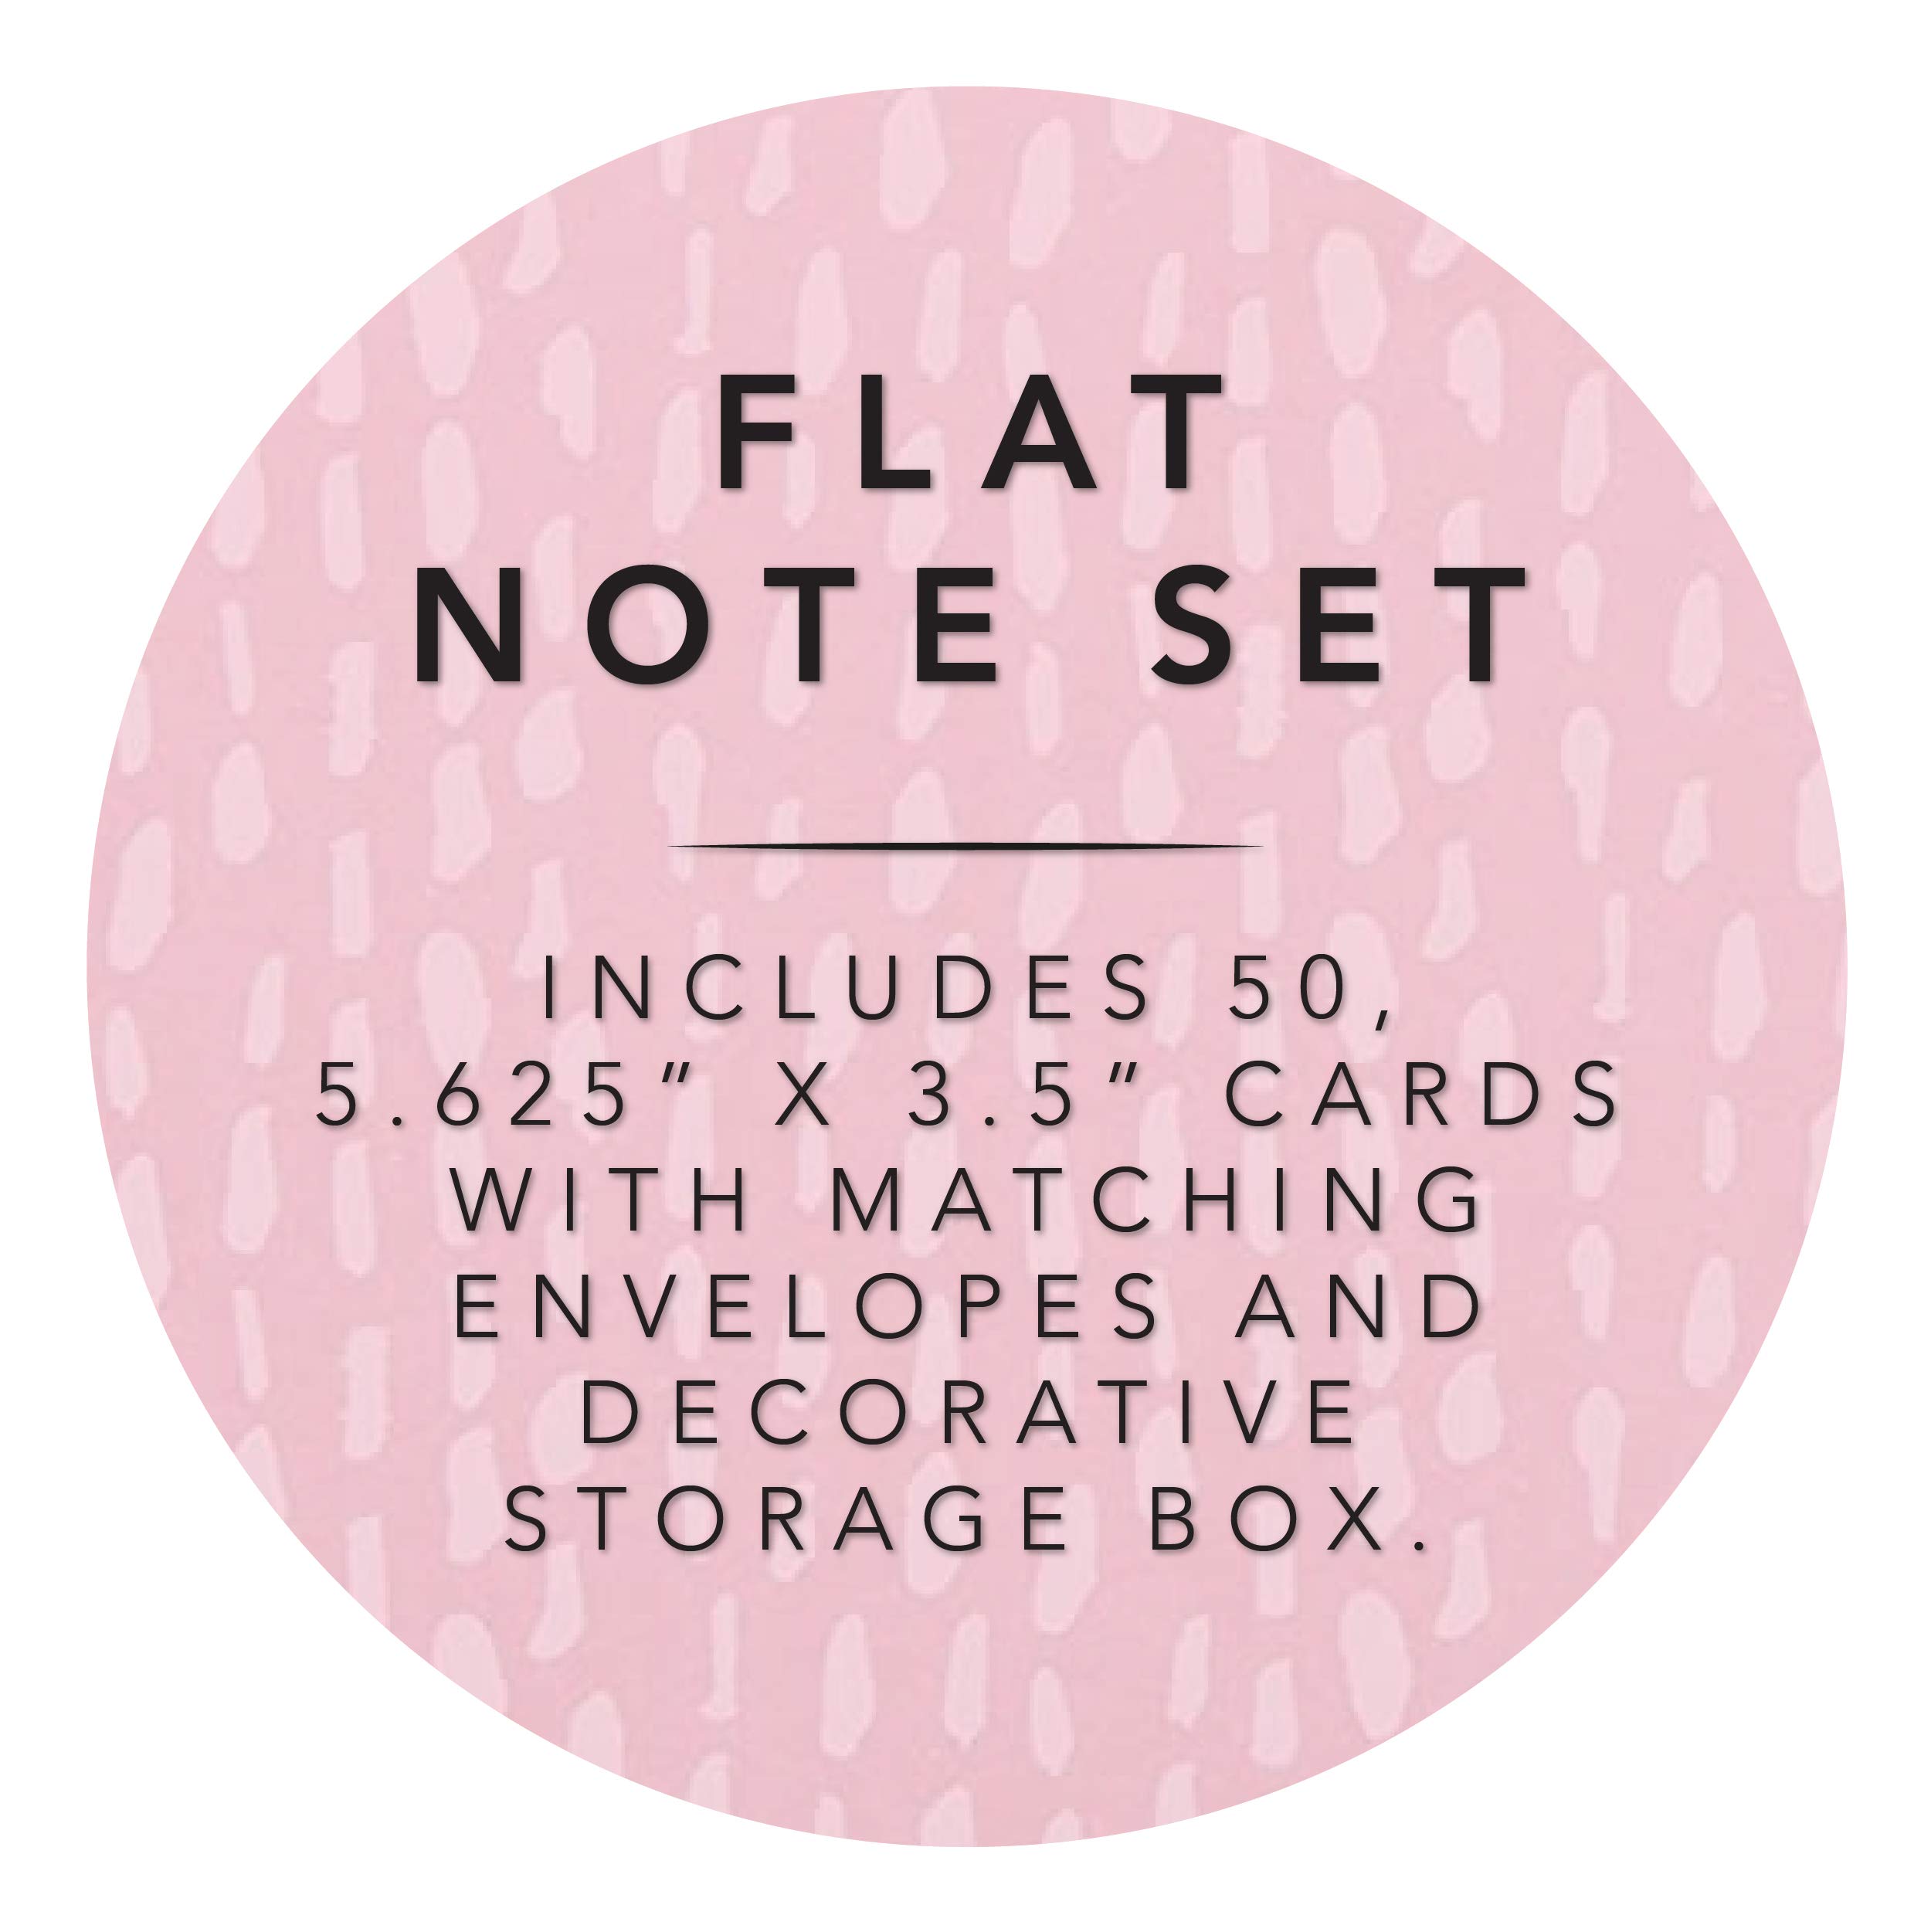 Graphique Gold Heart Flat Notes – Note Card Stationery with Adorable Soft Pink Border and Printed Gold Heart, 50 Note Cards and Matching Envelopes for Thank You Notes and Invitations, 5.625